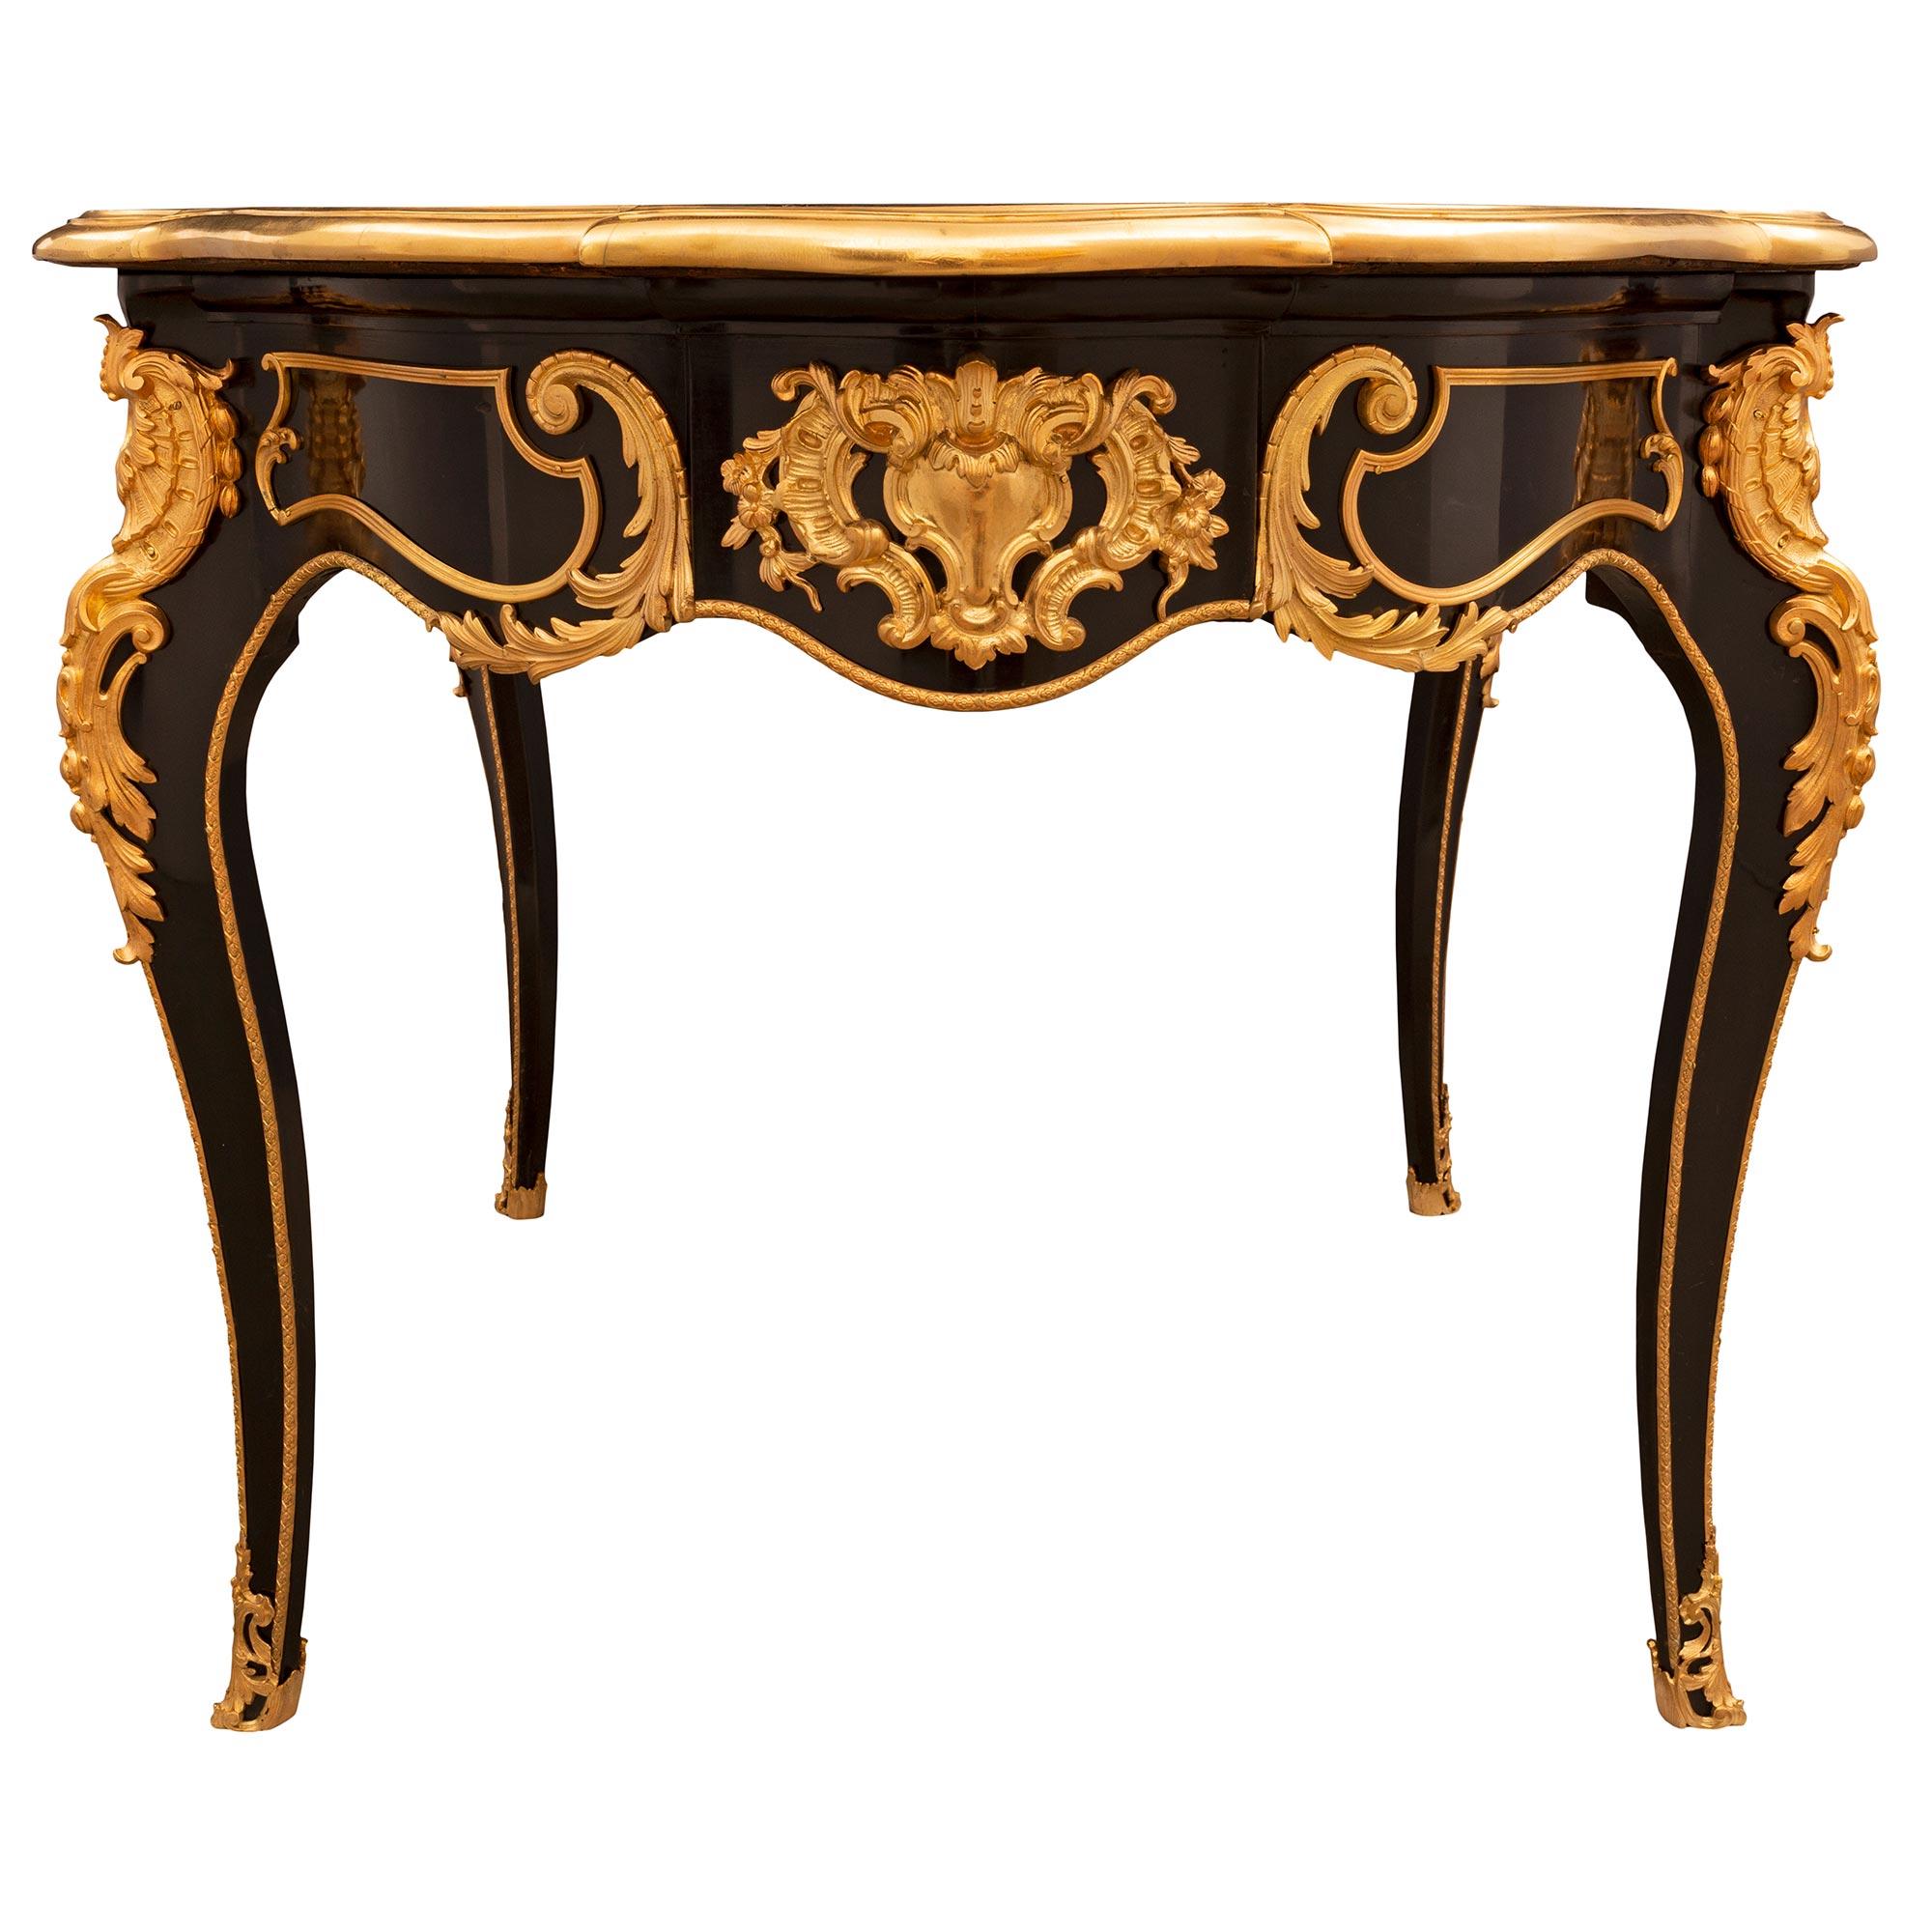 French 19th Century Louis XV St. Napoleon III Period Ebony and Ormolu Desk In Good Condition For Sale In West Palm Beach, FL